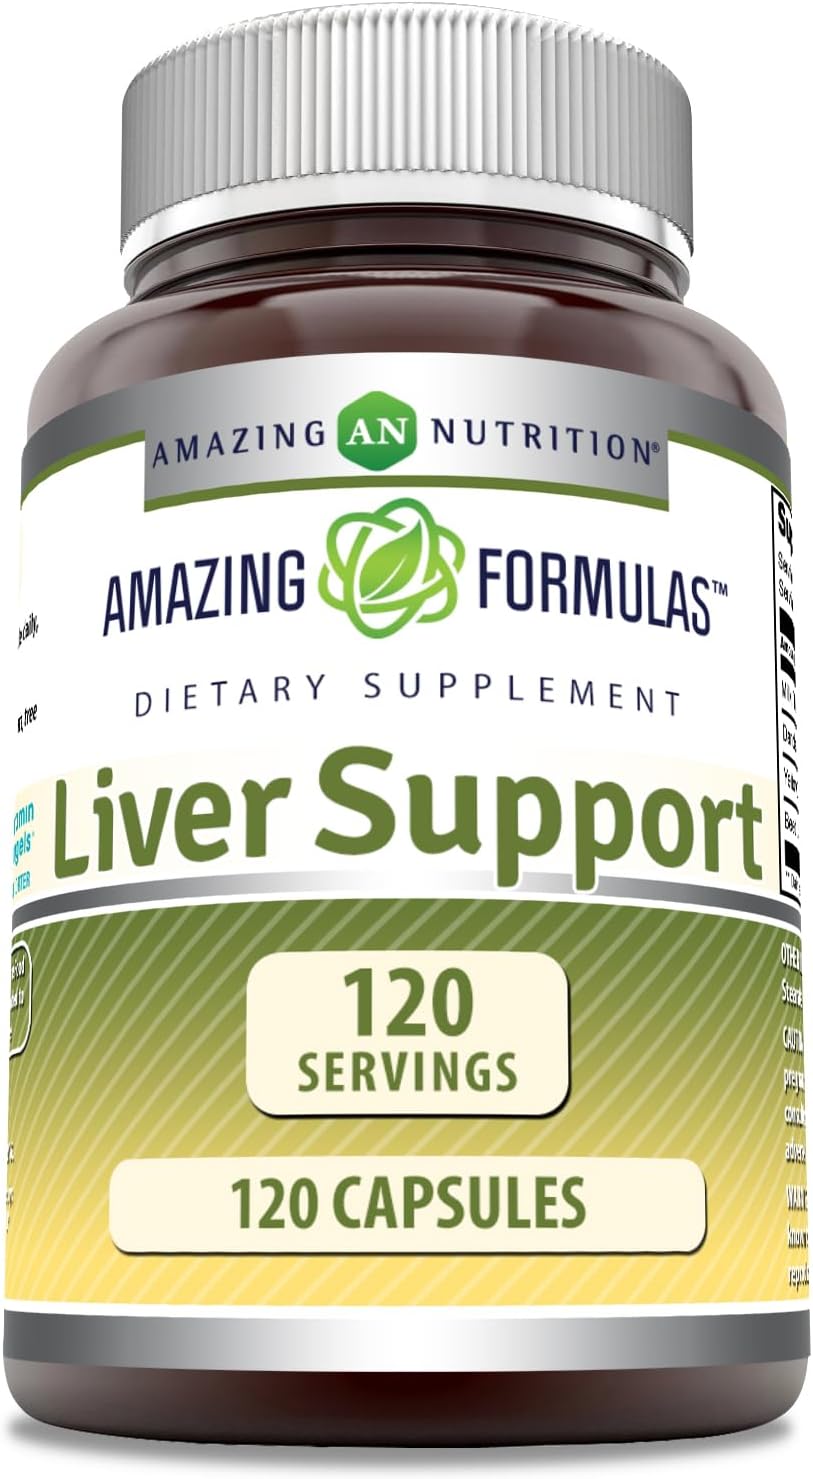 Amazing Formulas Liver Support 120 Capsules Supplement | Natural Herbal Formula | Contains Milk Thistle, Dandelion Root, Yellow Dock Root & Beet Root